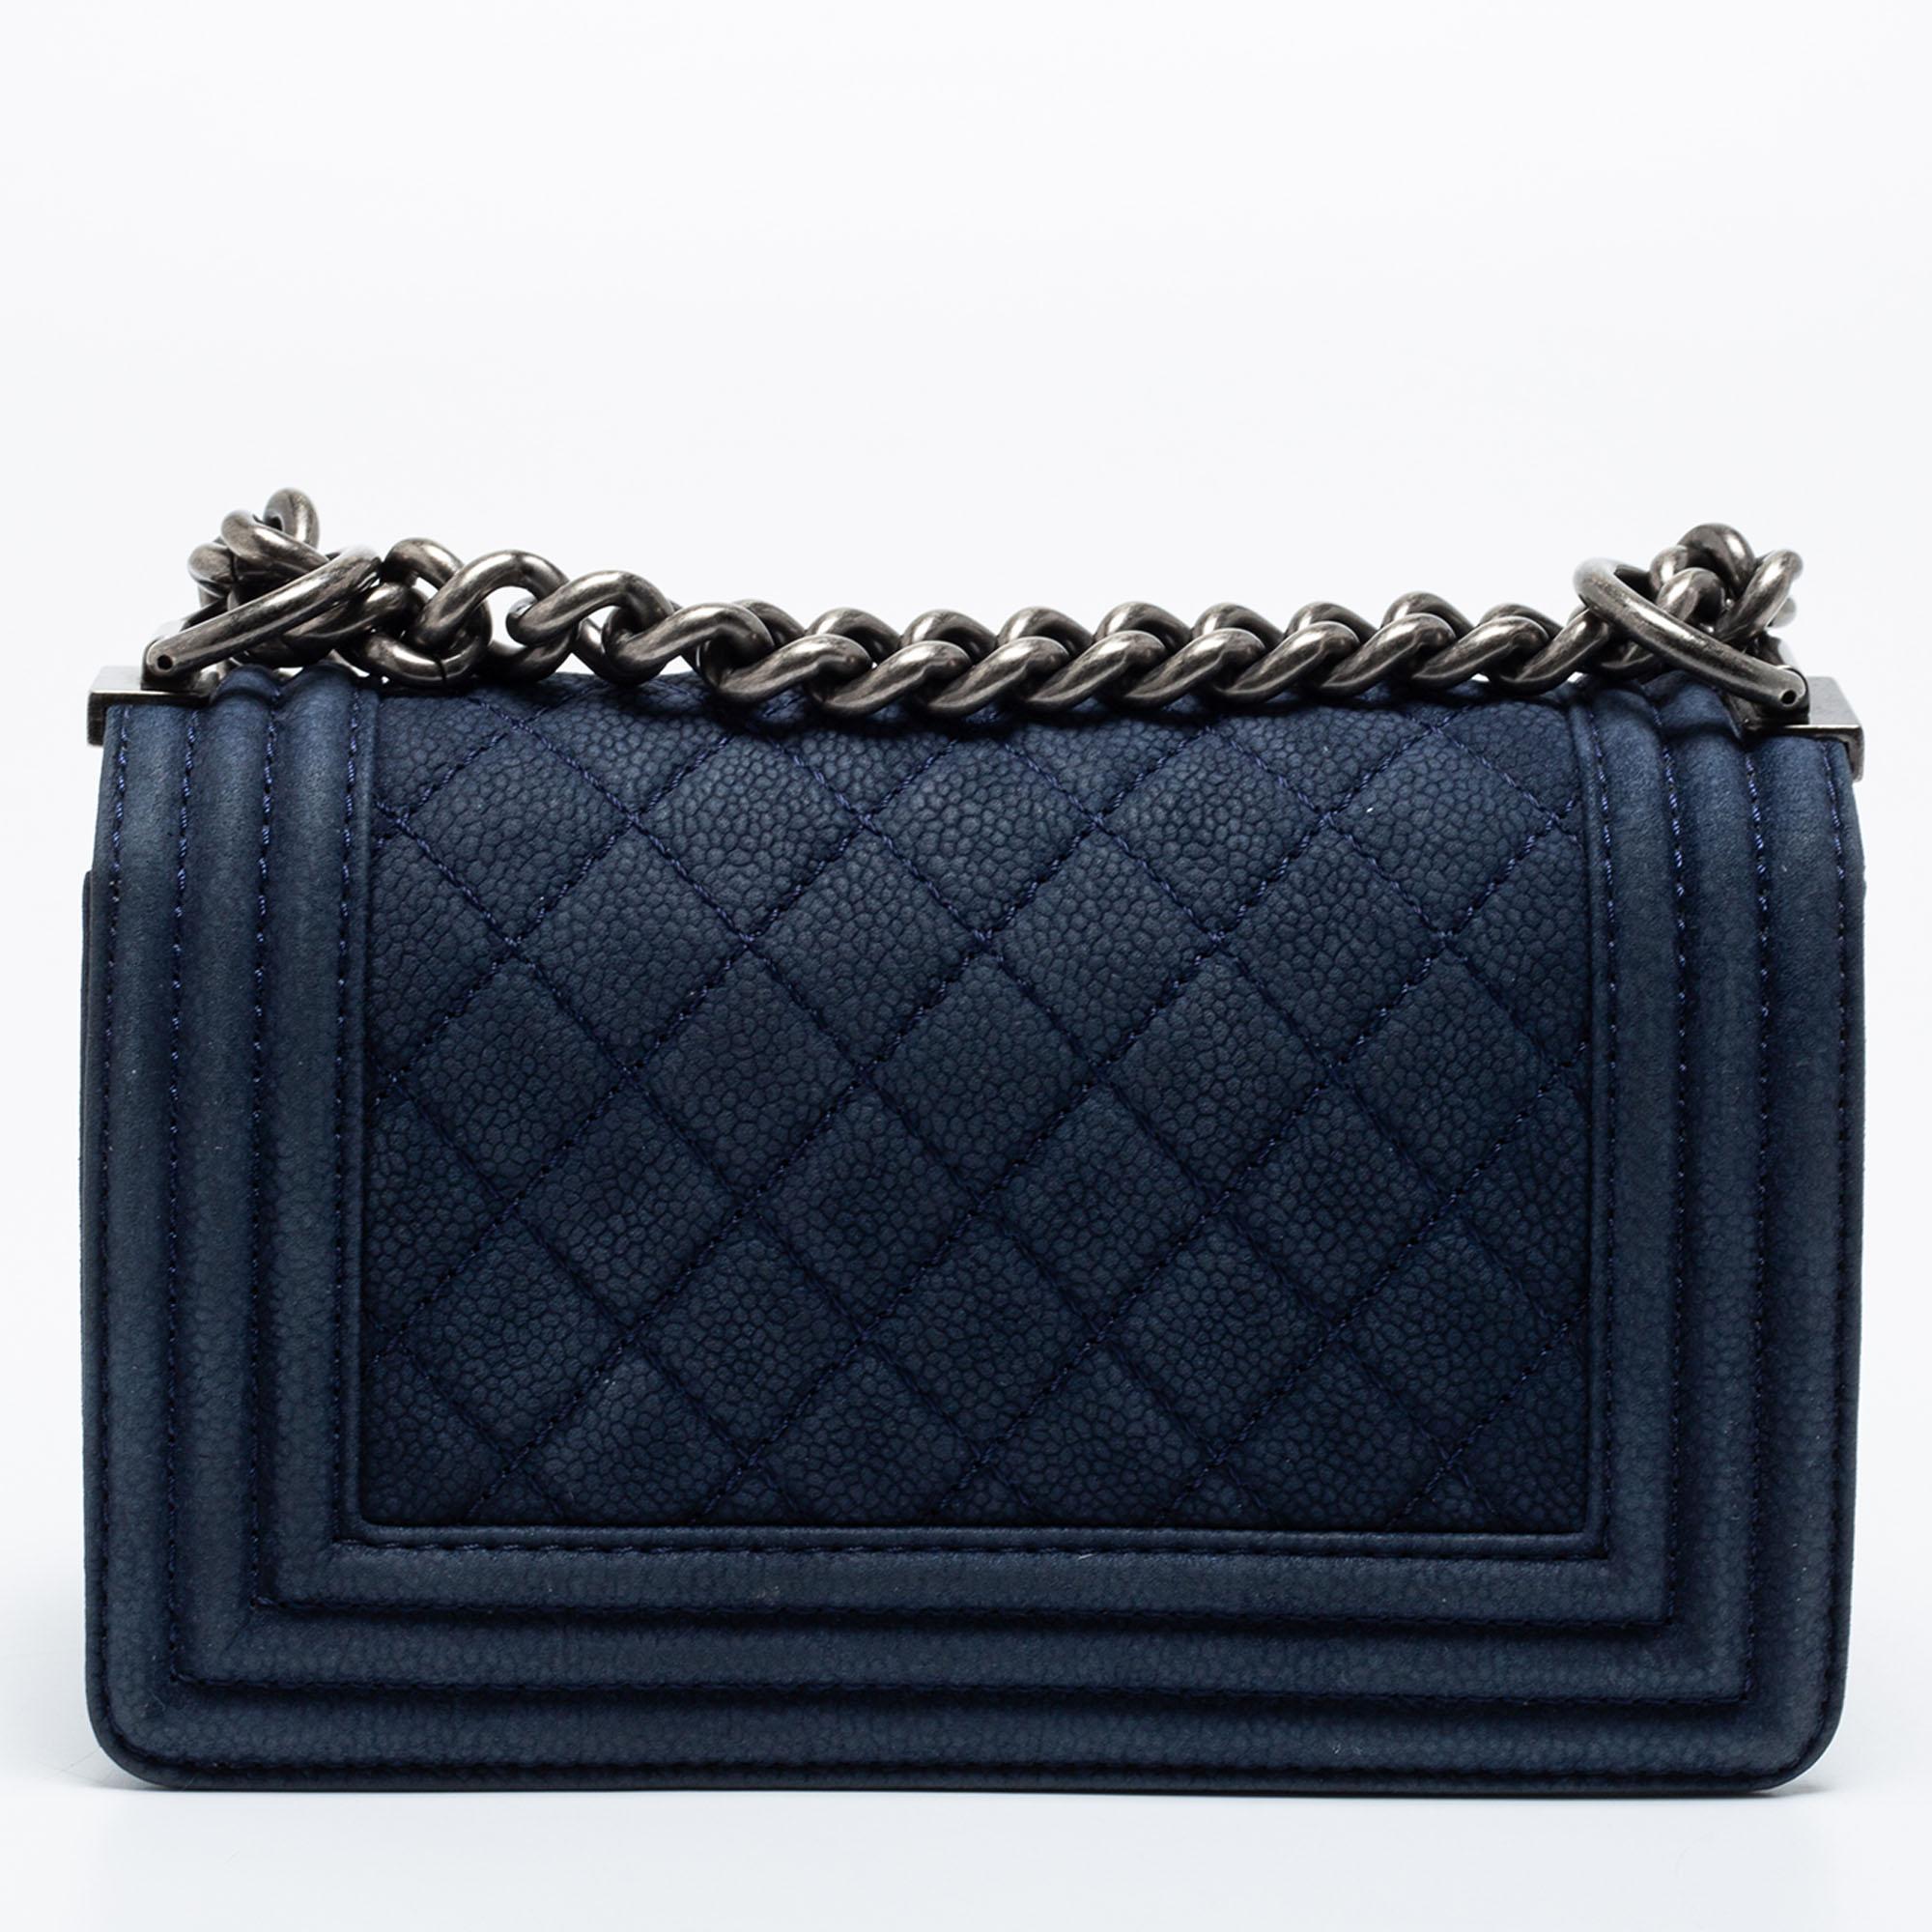 Introduced as a part of the Chanel Fall/Winter collection of 2011, the Boy flap bag is alluring and complemented with exquisite details. This blue creation is meticulously crafted from quilted caviar nubuck leather and features side paneling, a